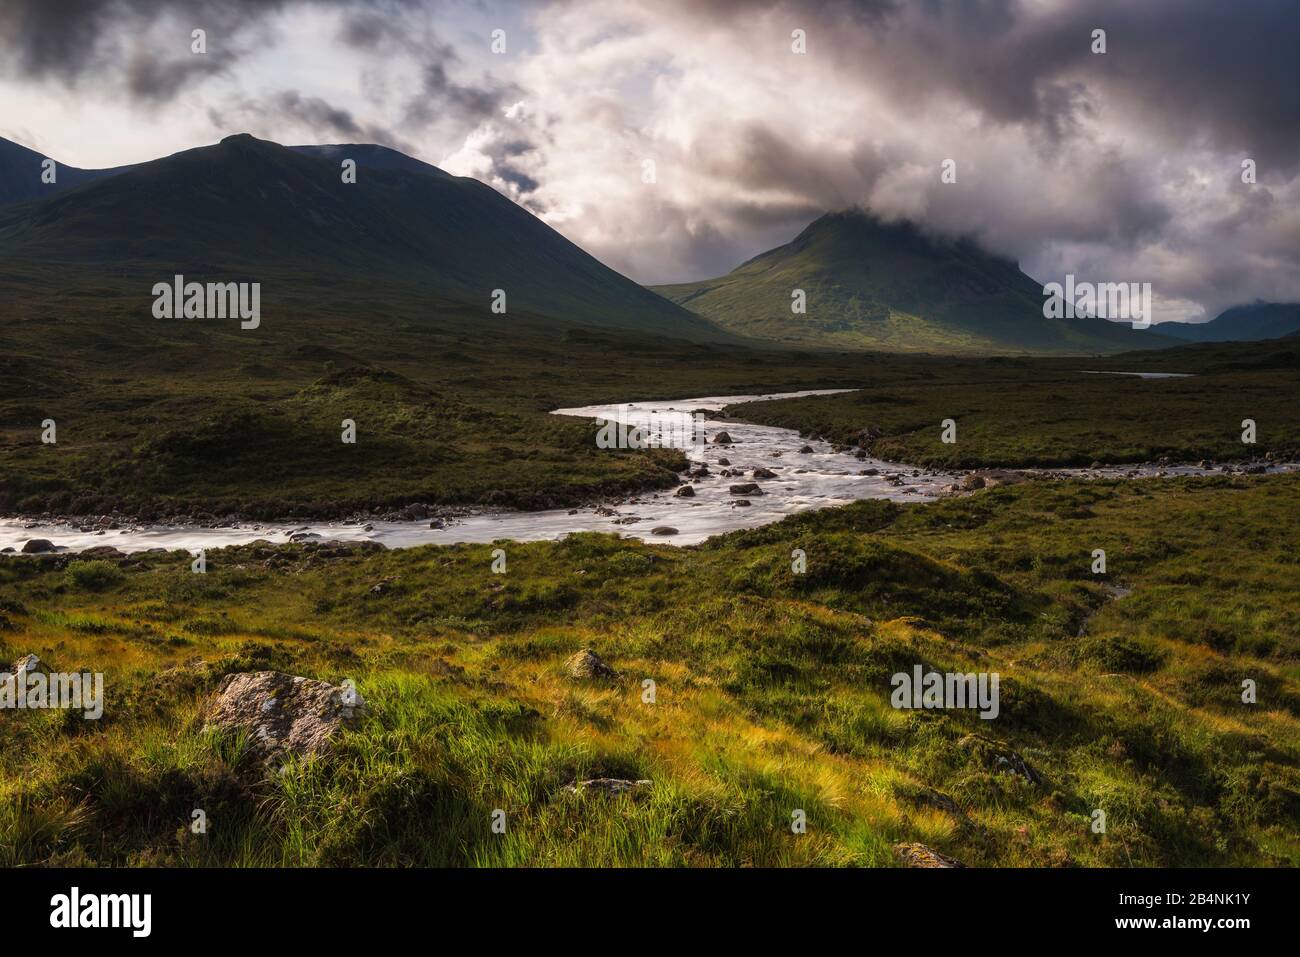 Sligachan River with the mountain panorama of the Cuilins, Isle of Skye, Scotland Stock Photo